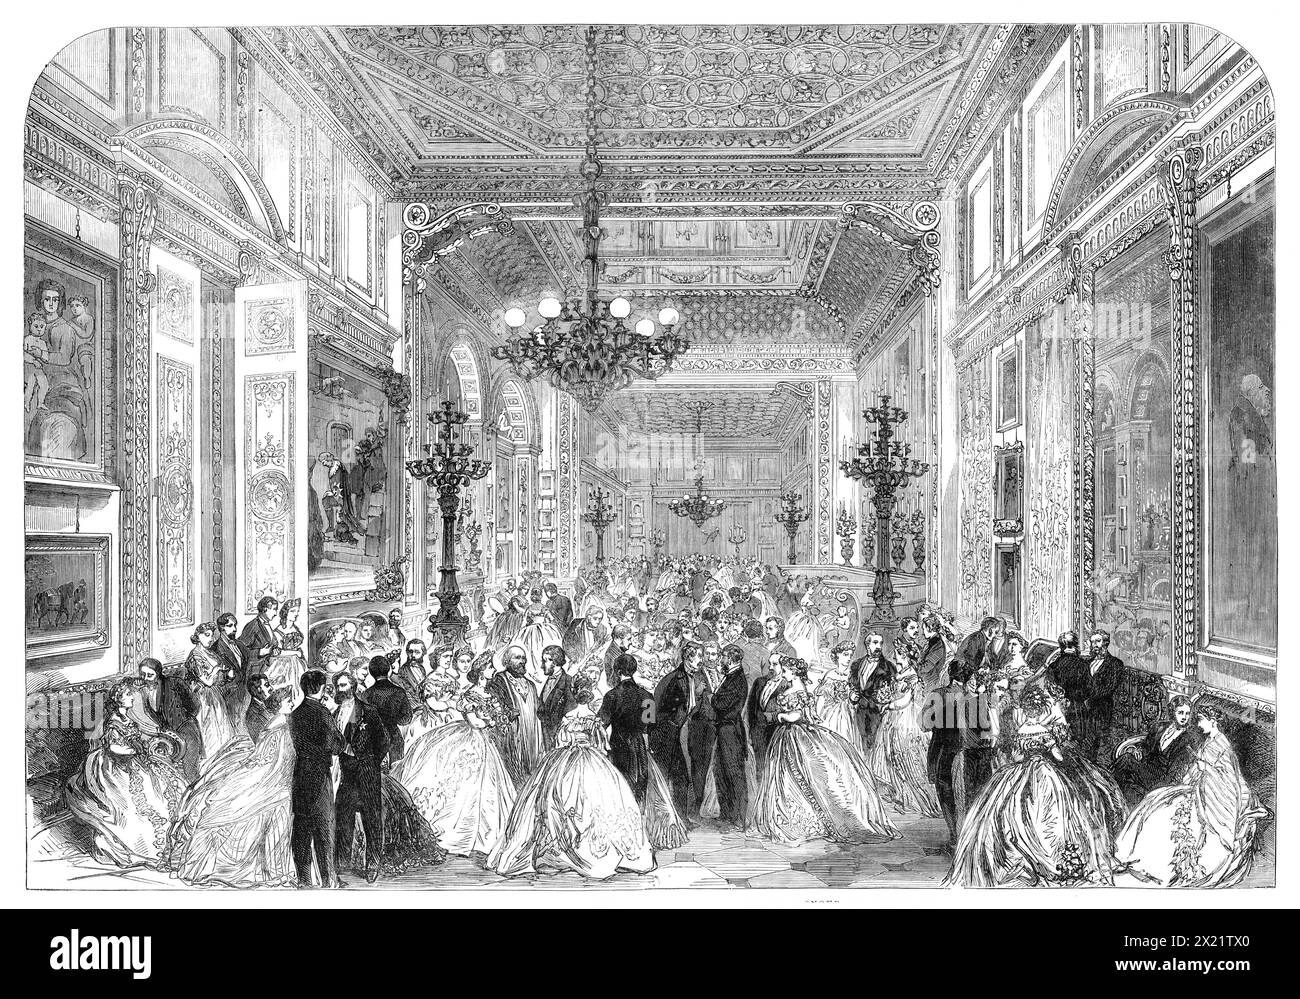 The Duchess of Sutherland's assembly at Stafford House in honour of Garibaldi, 1864. Scene depicting an episode during '...the General's sojourn in this metropolis [ie London, when he enjoyed] the splendid entertainment provided by the hospitality of the Duke and Duchess of Sutherland. The superbly-decorated apartments of Stafford House were never seen to greater advantage than when crowded by this great assembly to do honour to an illustrious guest of the noble Duke and of the nation'. From &quot;Illustrated London News&quot;, 1864. Stock Photo